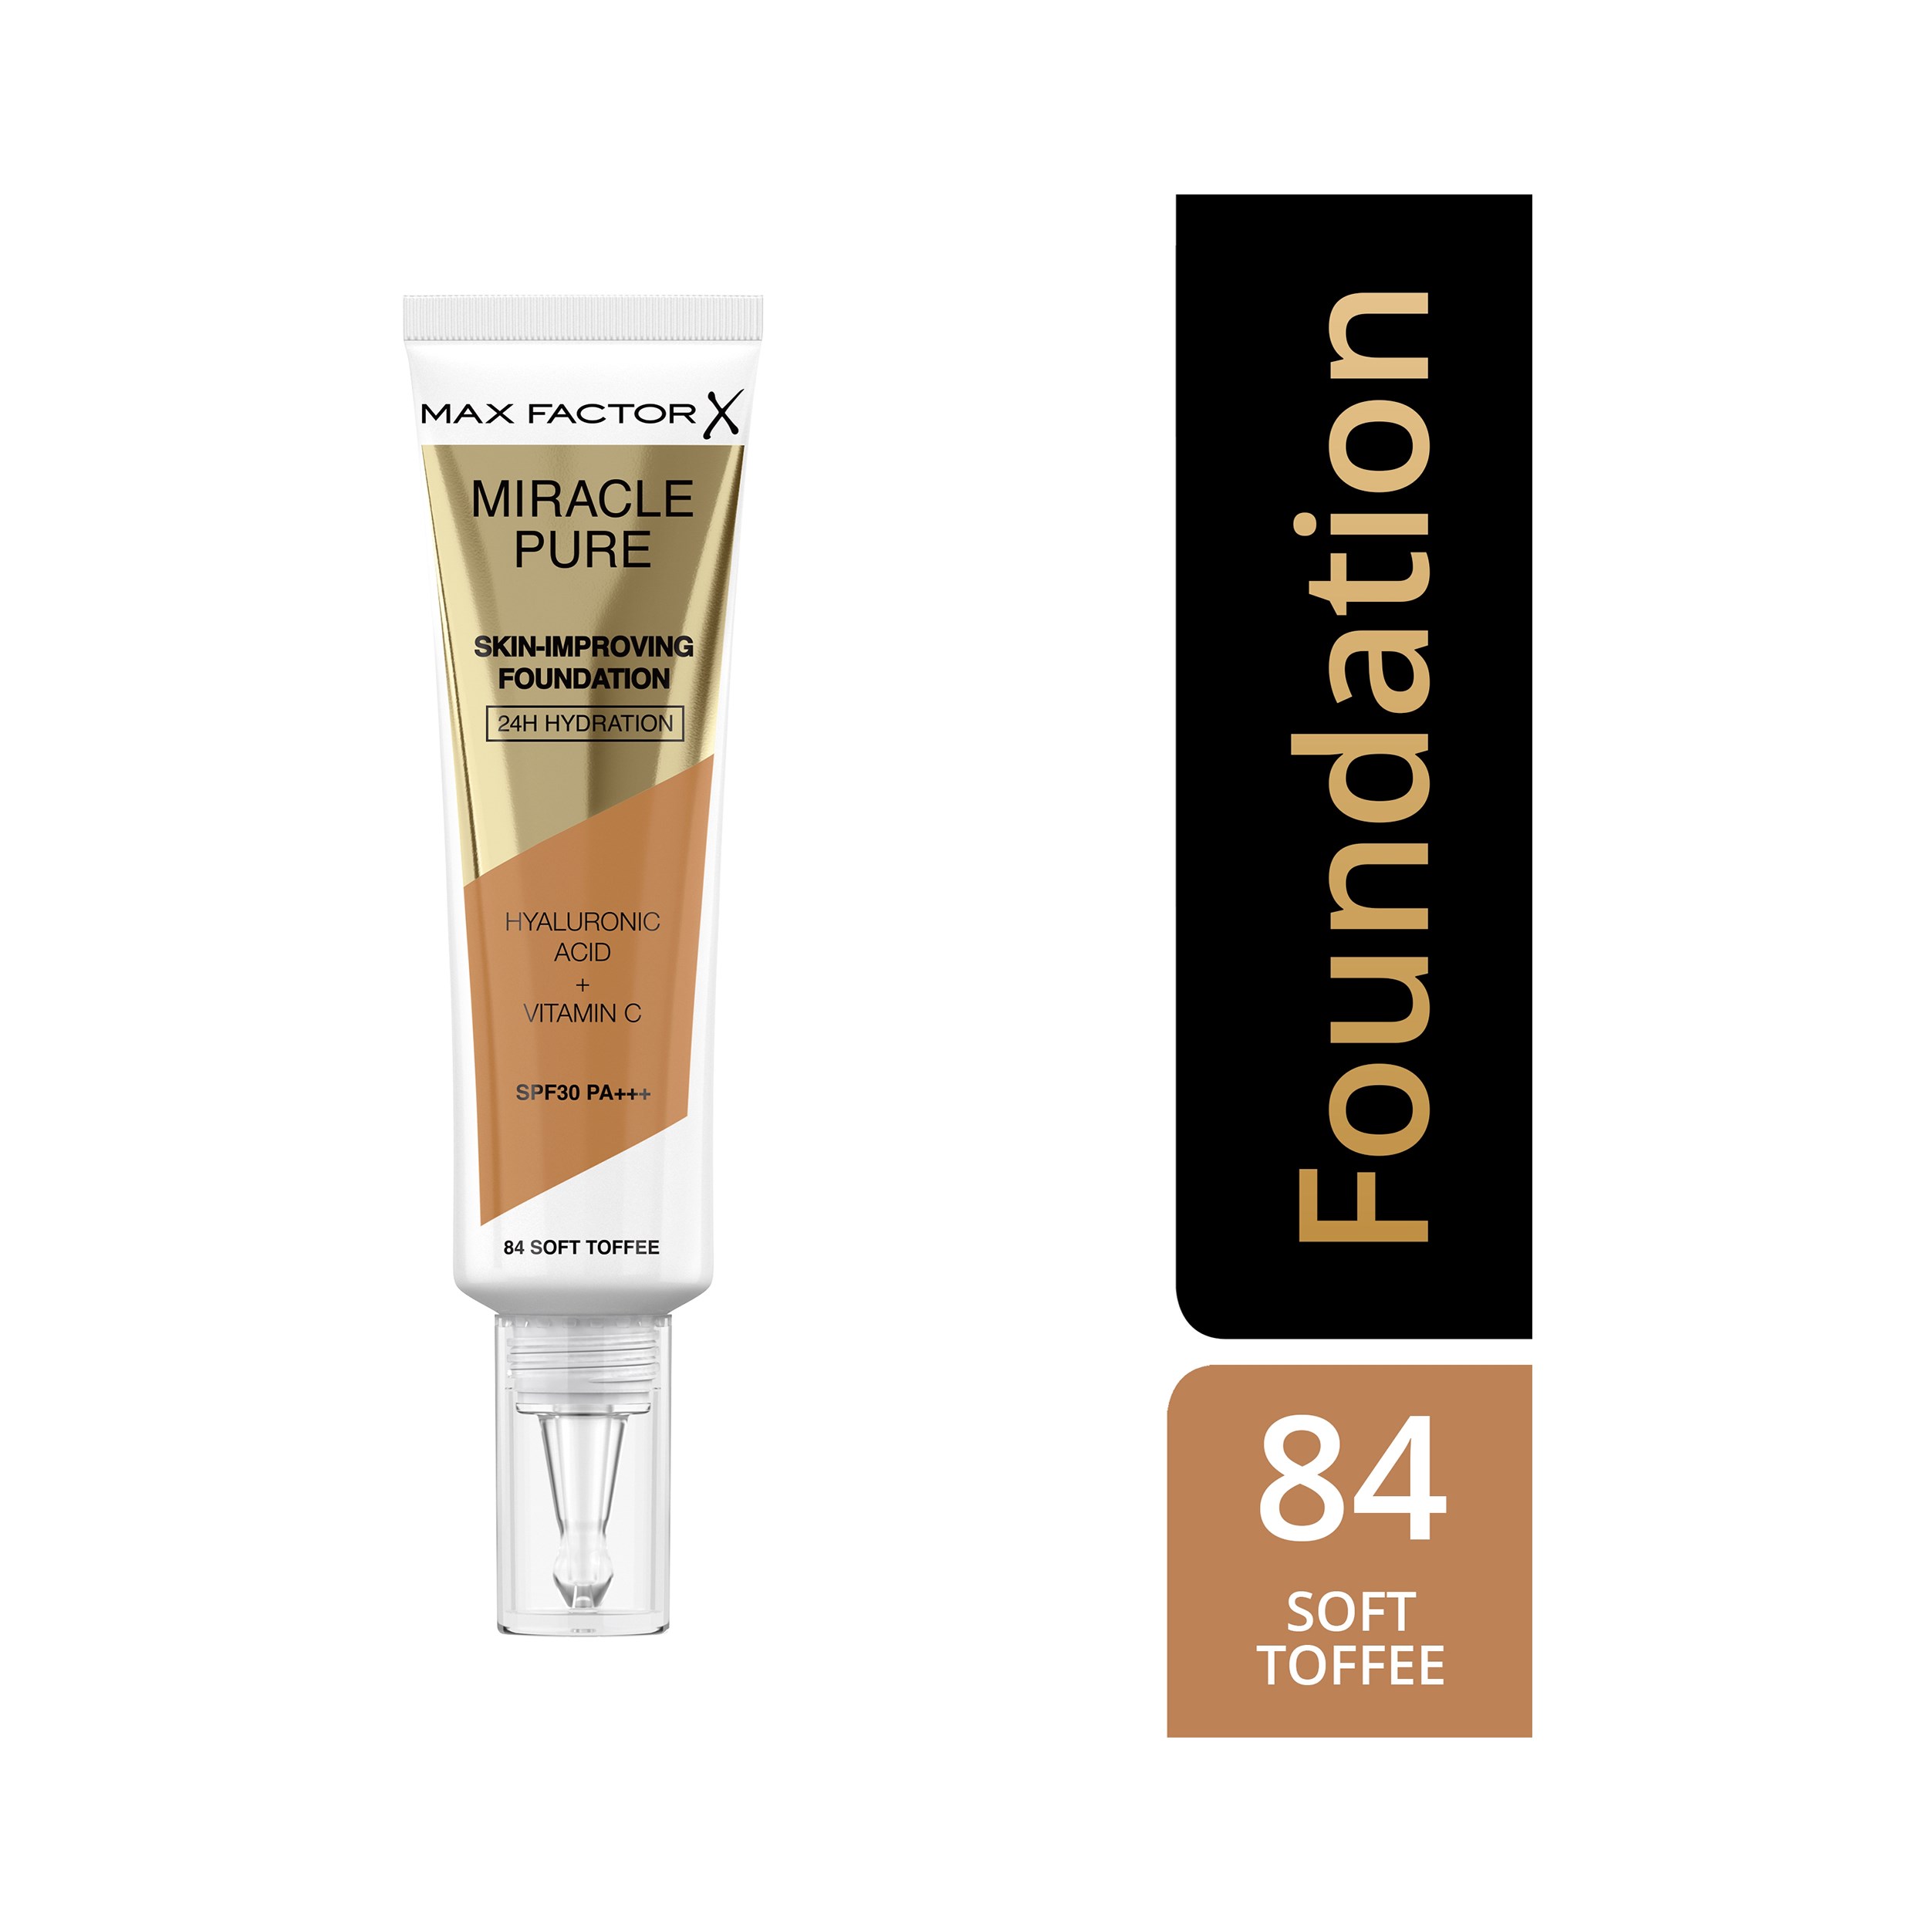 Max Factor Miracle Pure Skin-Improving Foundation 84 Soft Toffee